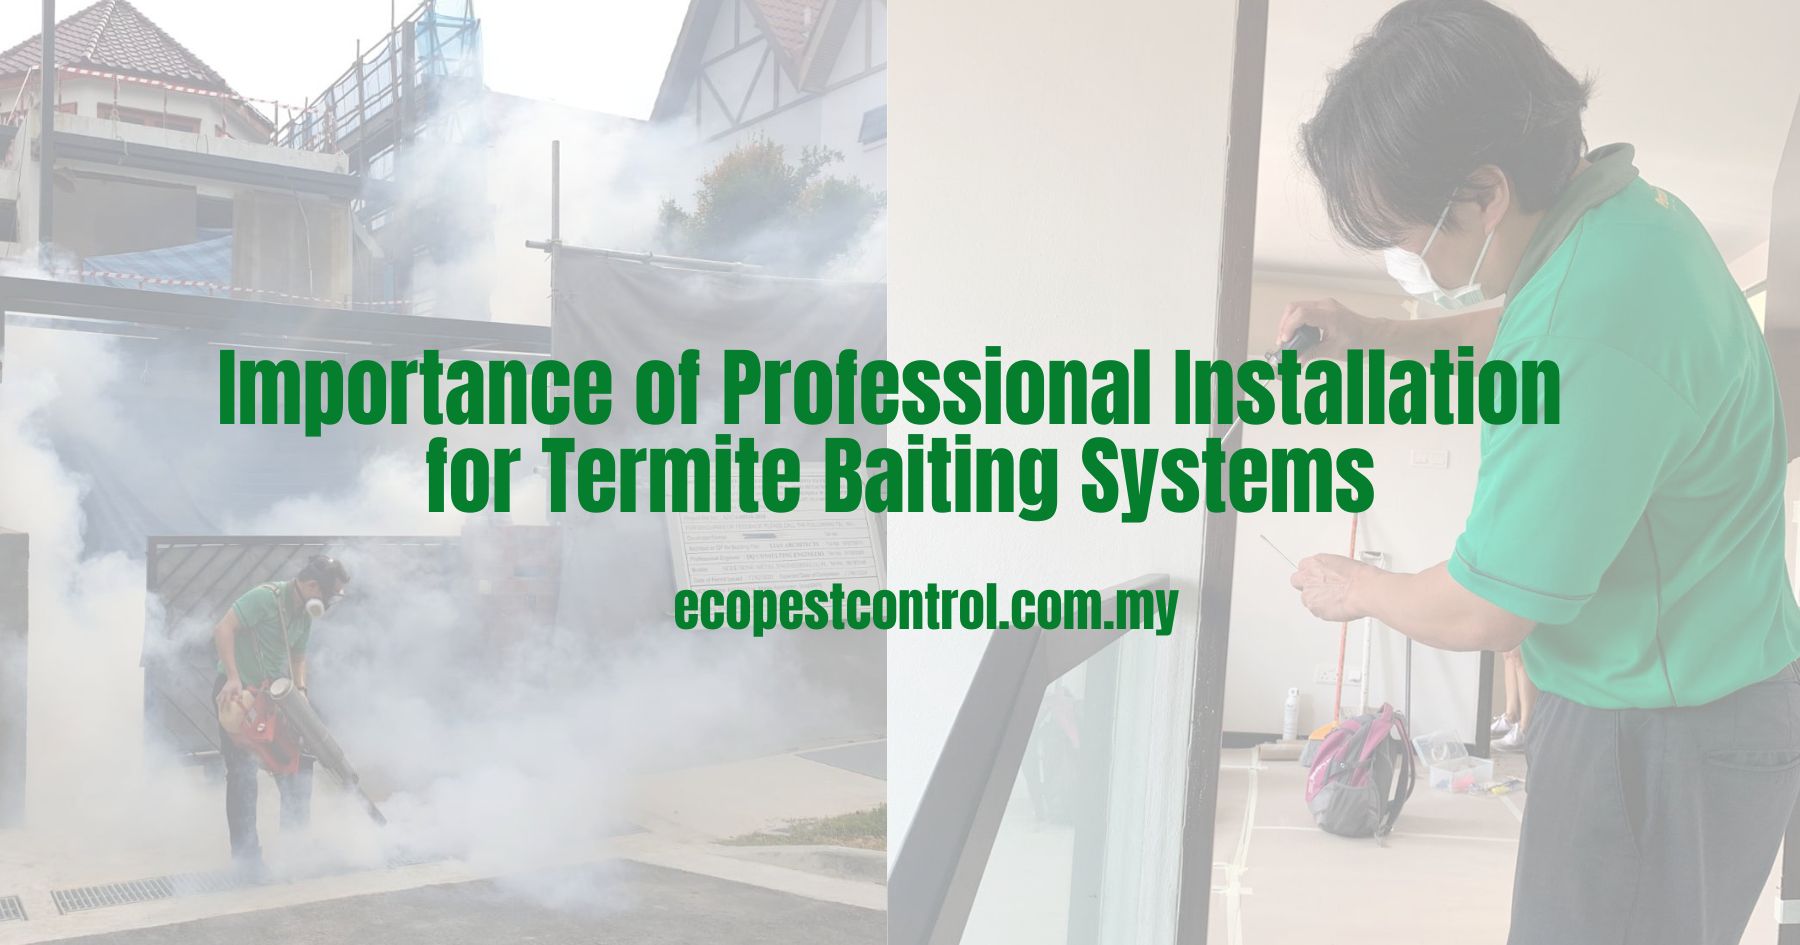 Importance of Professional Installation for Termite Baiting Systems